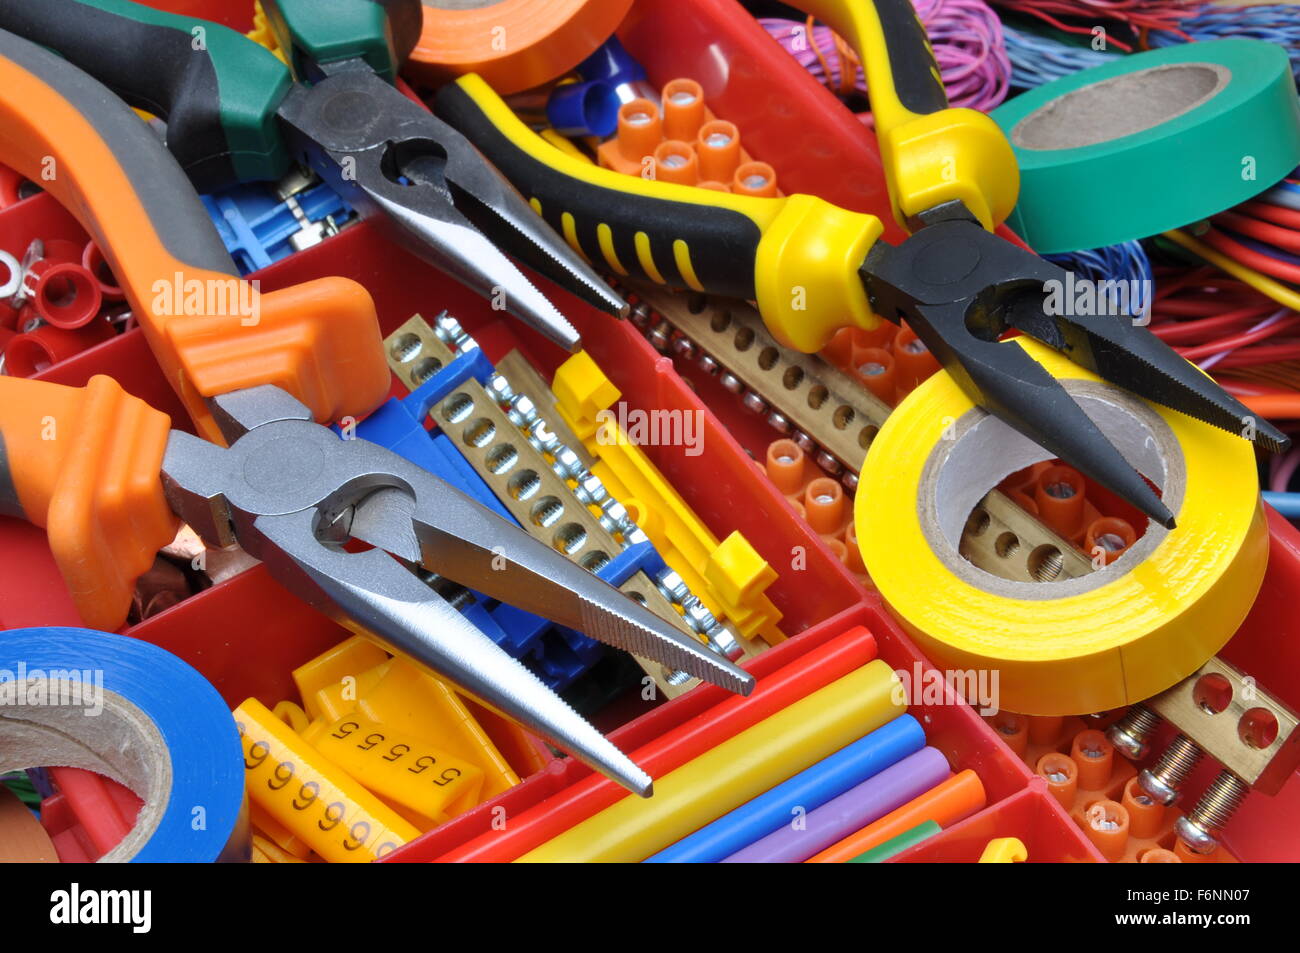 https://c8.alamy.com/comp/F6NN07/tool-box-with-electrical-tools-and-components-F6NN07.jpg